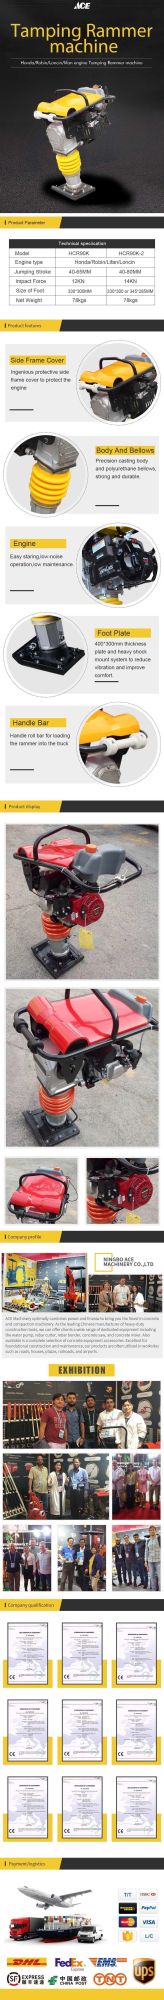 Factory Price 70 Kg Concrete Tamping Rammer Jumping Jack Powered by Honda Gx160